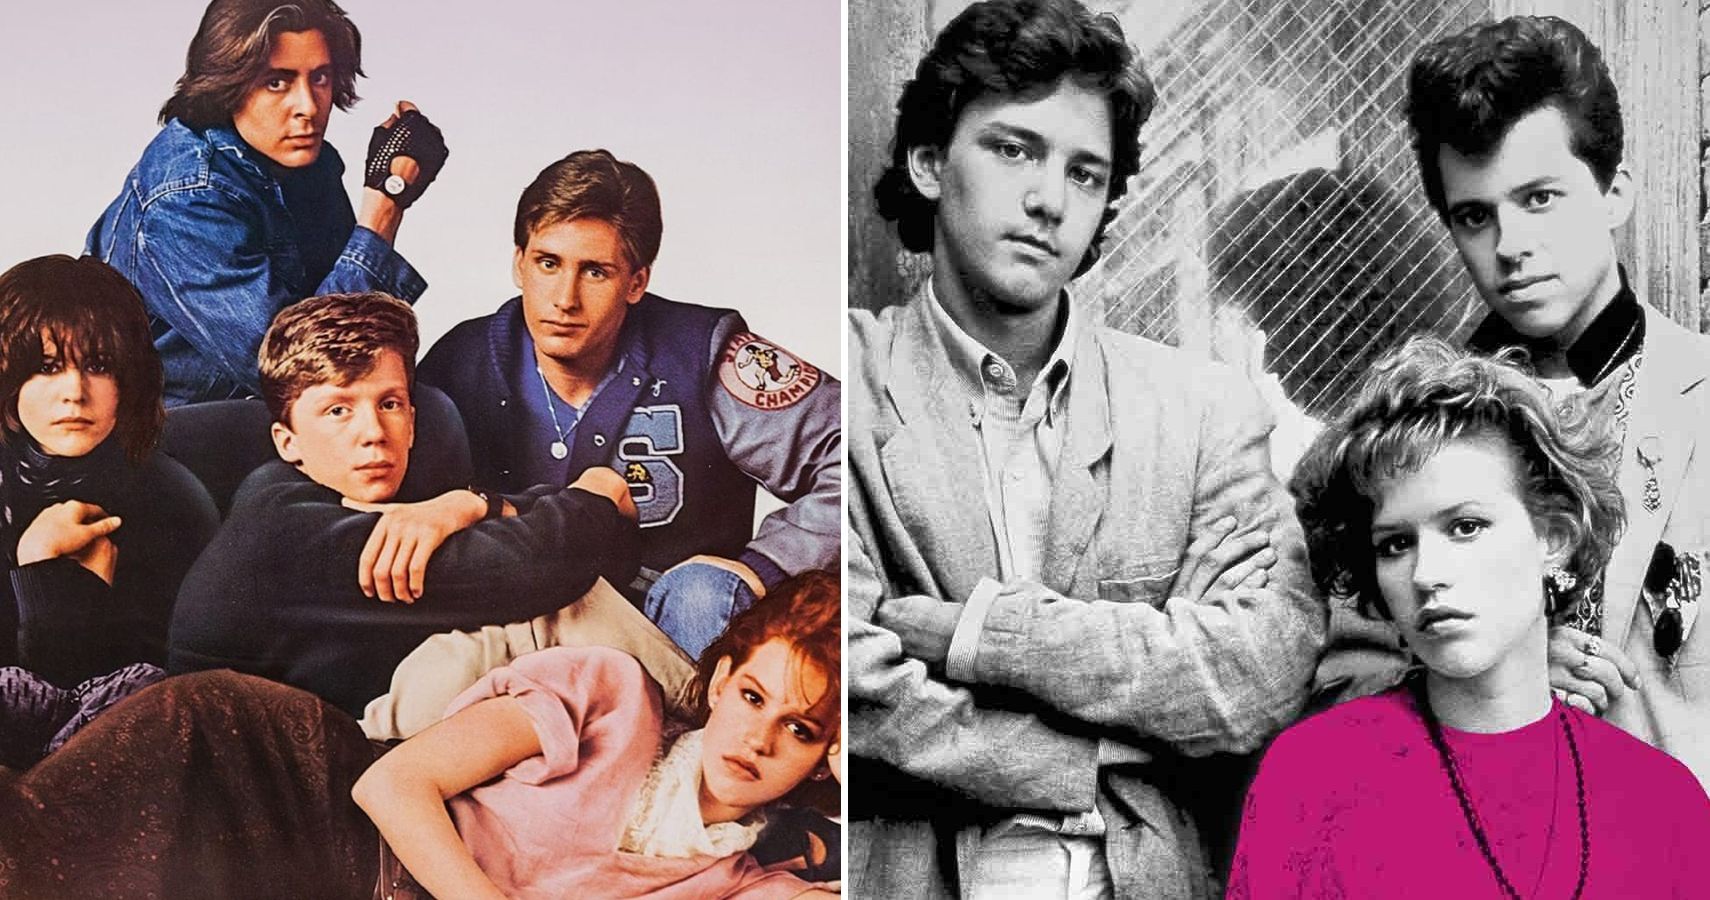 5 Things That Aged Well In John Hughes Movies (& 5 That Didnt)